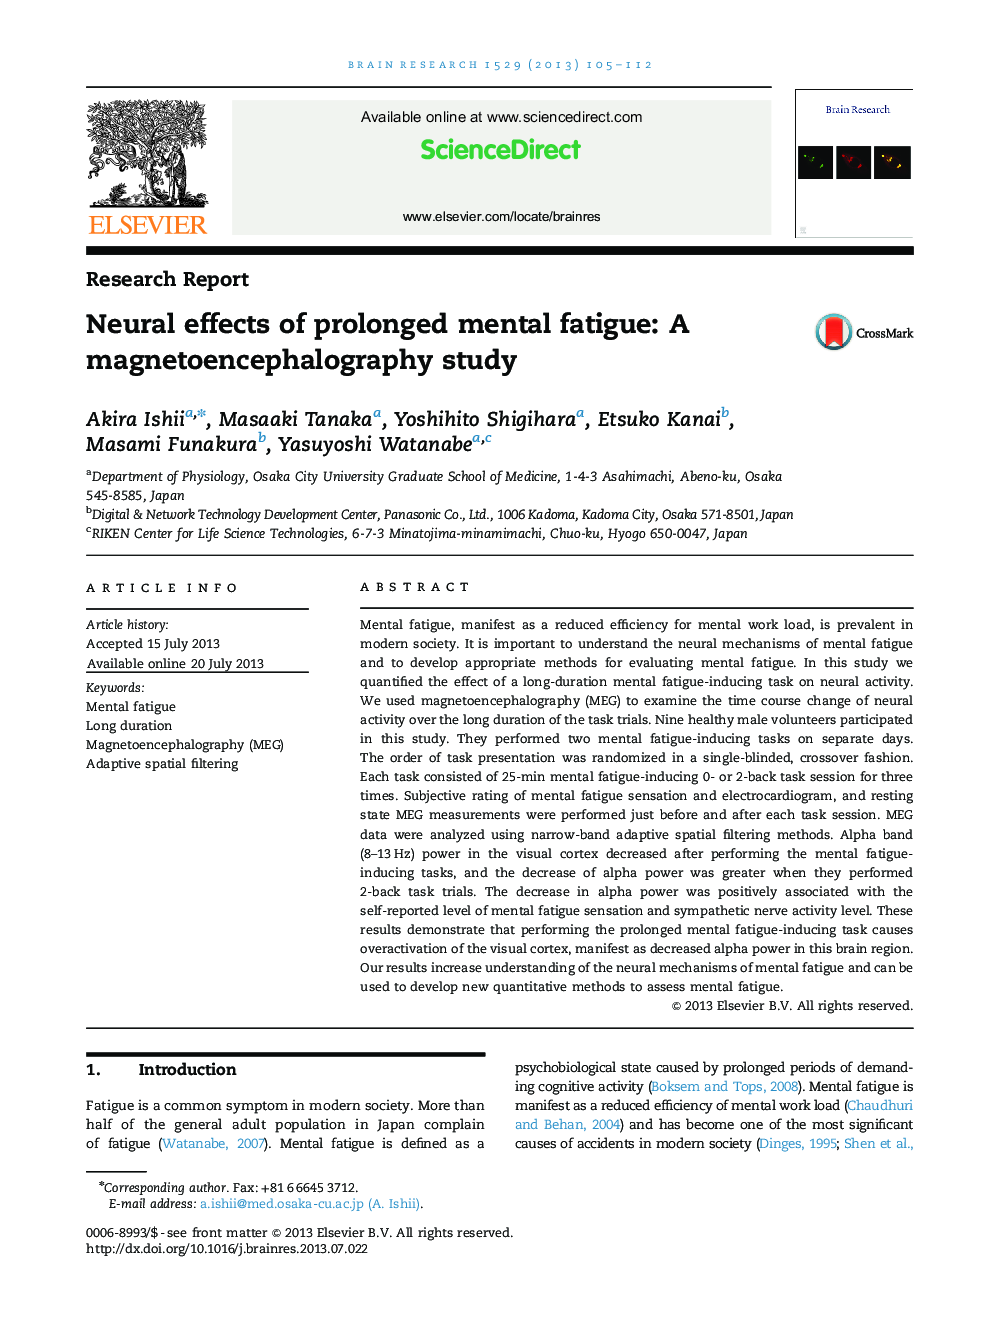 Research ReportNeural effects of prolonged mental fatigue: A magnetoencephalography study